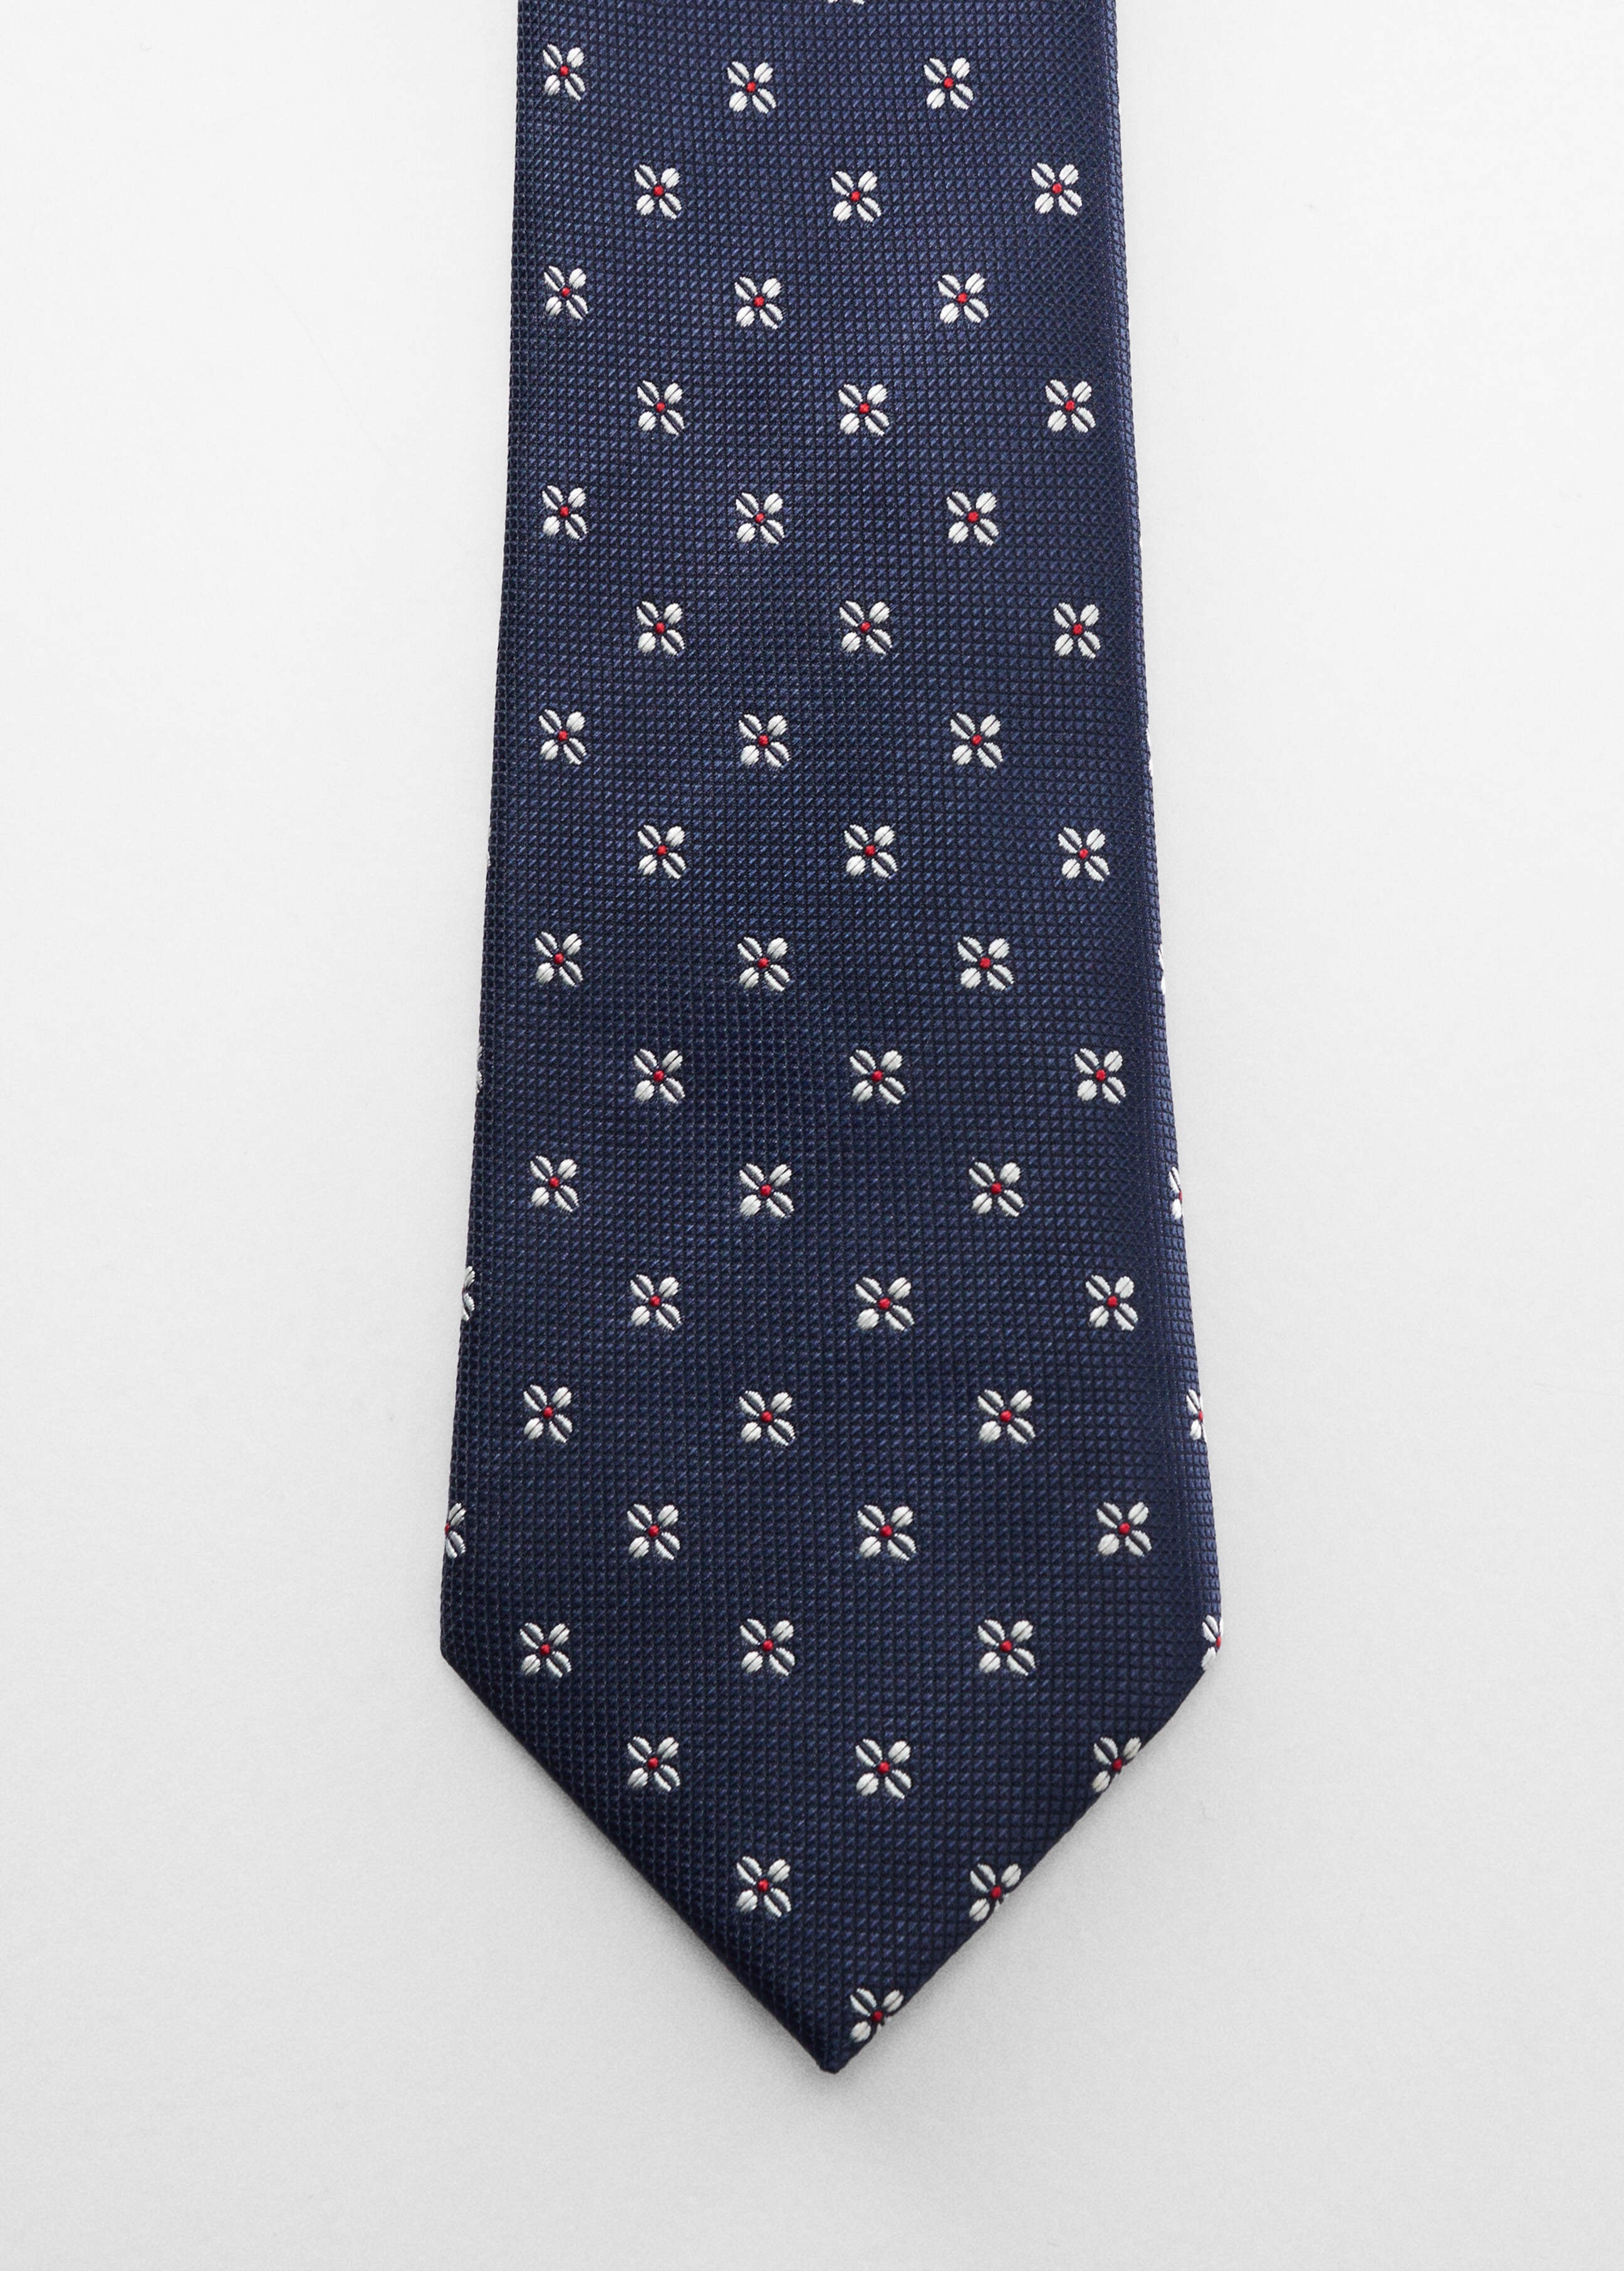 Floral print tie - Details of the article 1